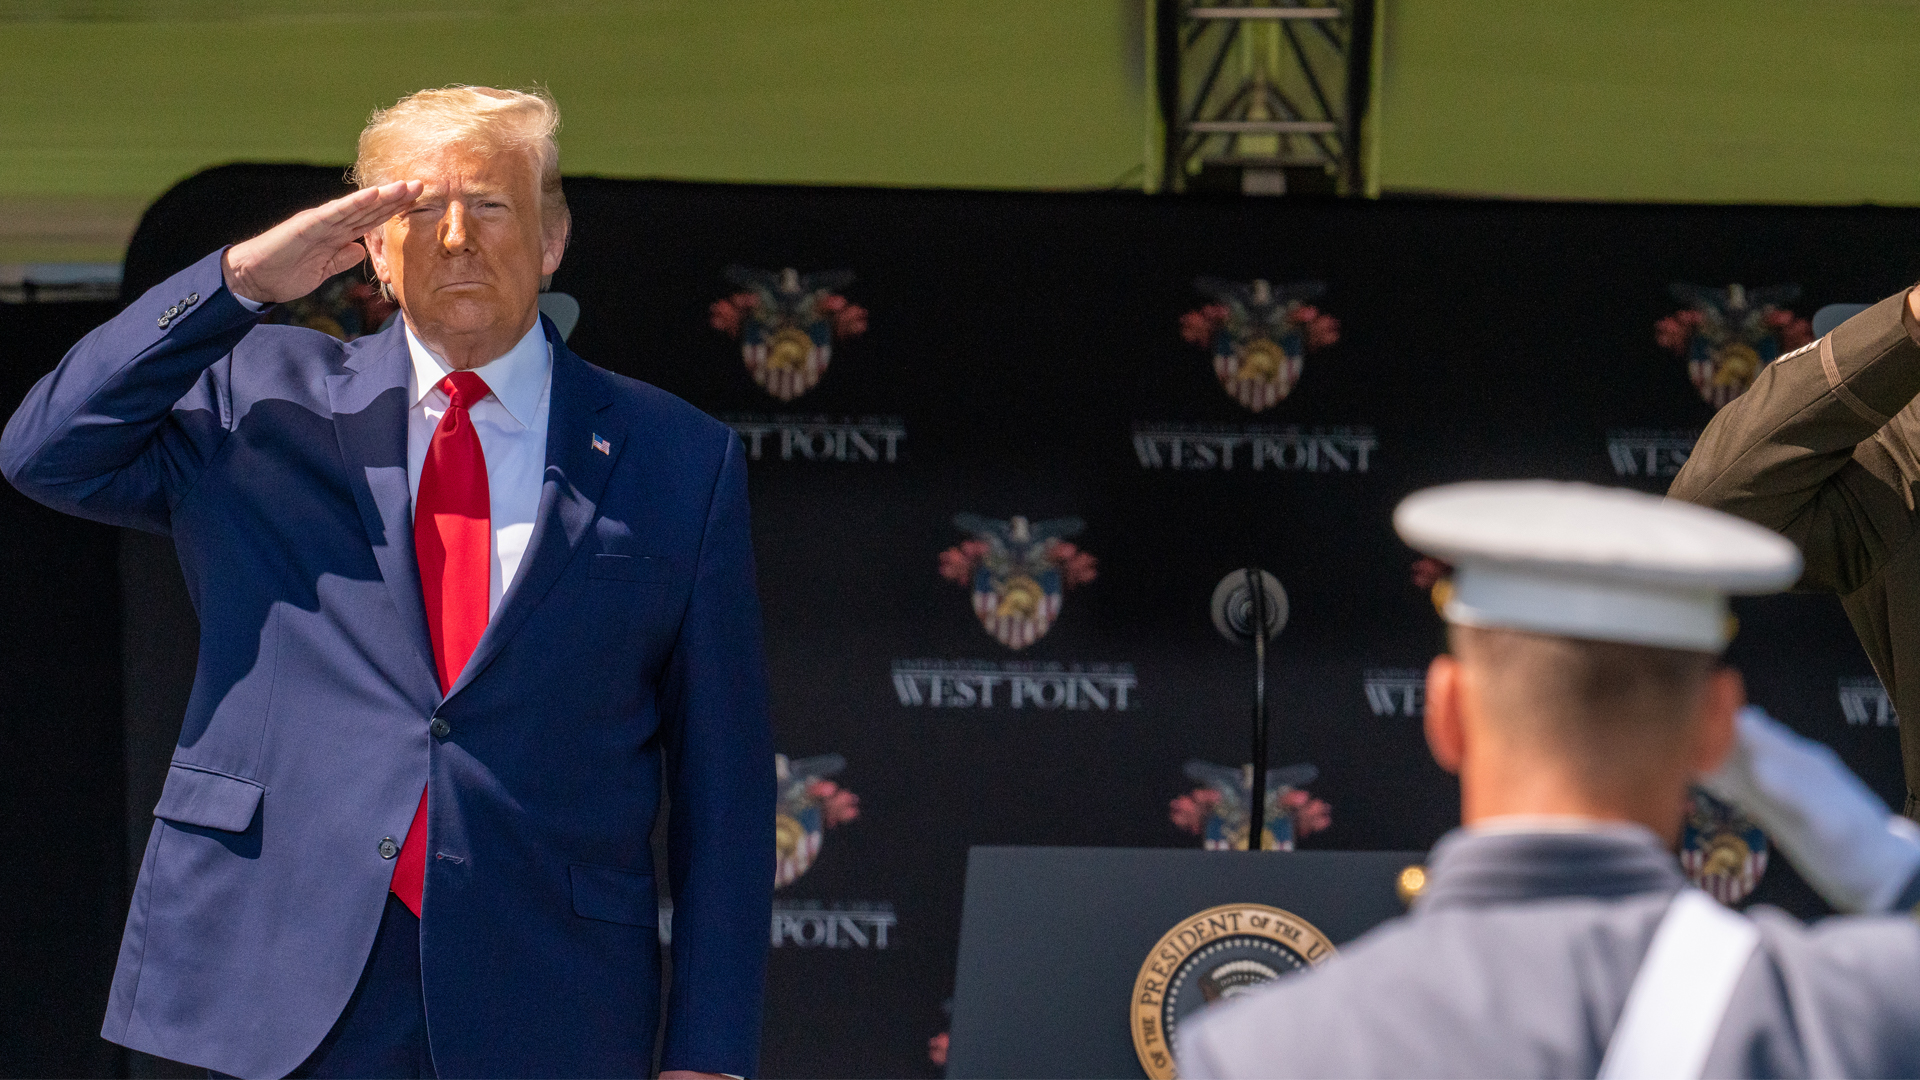 Trump reportedly didn’t want wounded warriors in his military parade because it wouldn’t ‘look good’